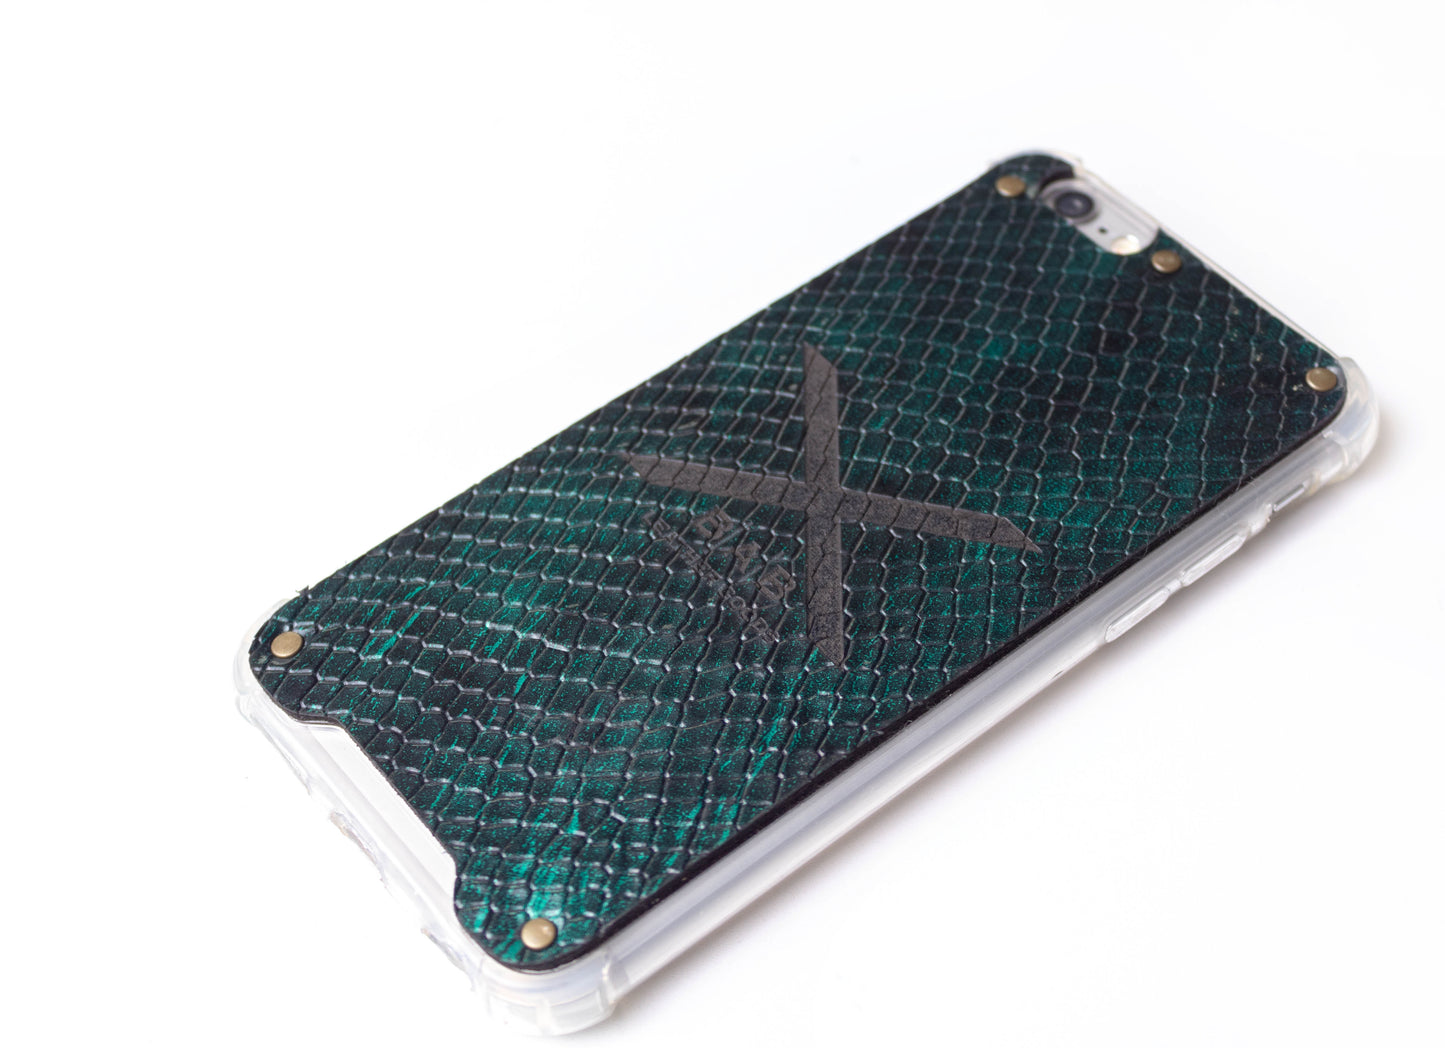 Textured Green Python Patent Genuine Leather iPhone Case cut and laser engraved, 5 Bronze Rivets.- F36